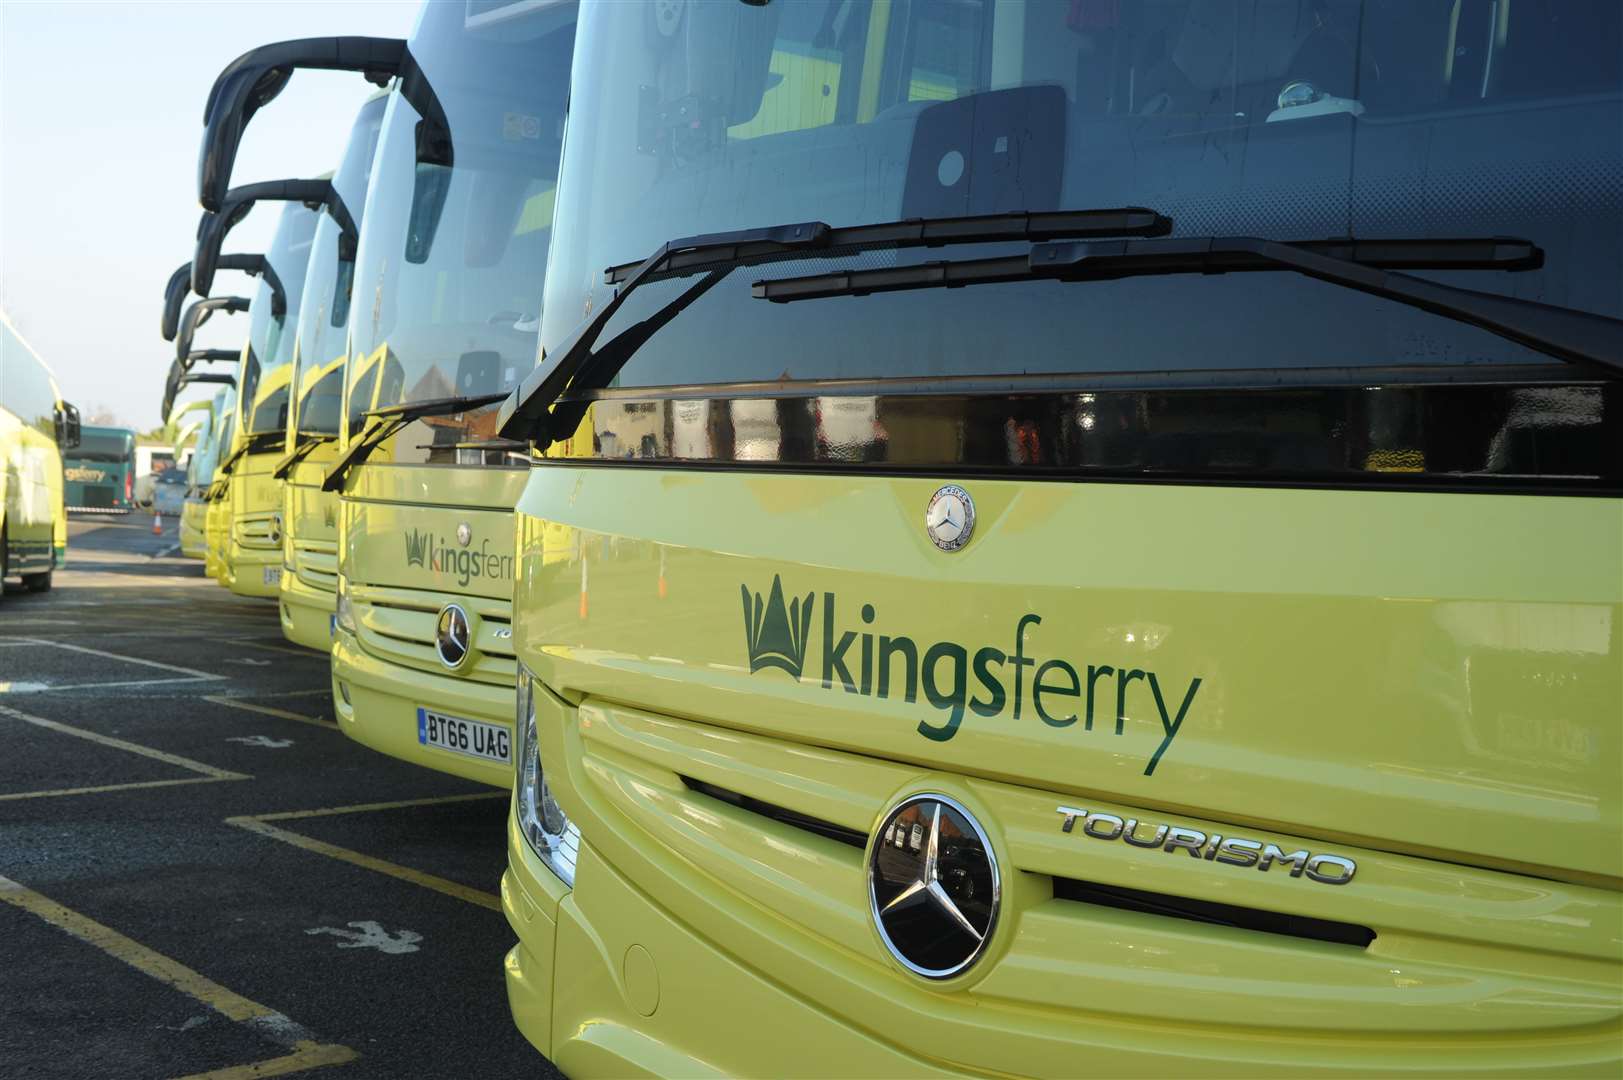 King Ferry commuters are able to buy tickets which reflect the expected shift towards home and office working